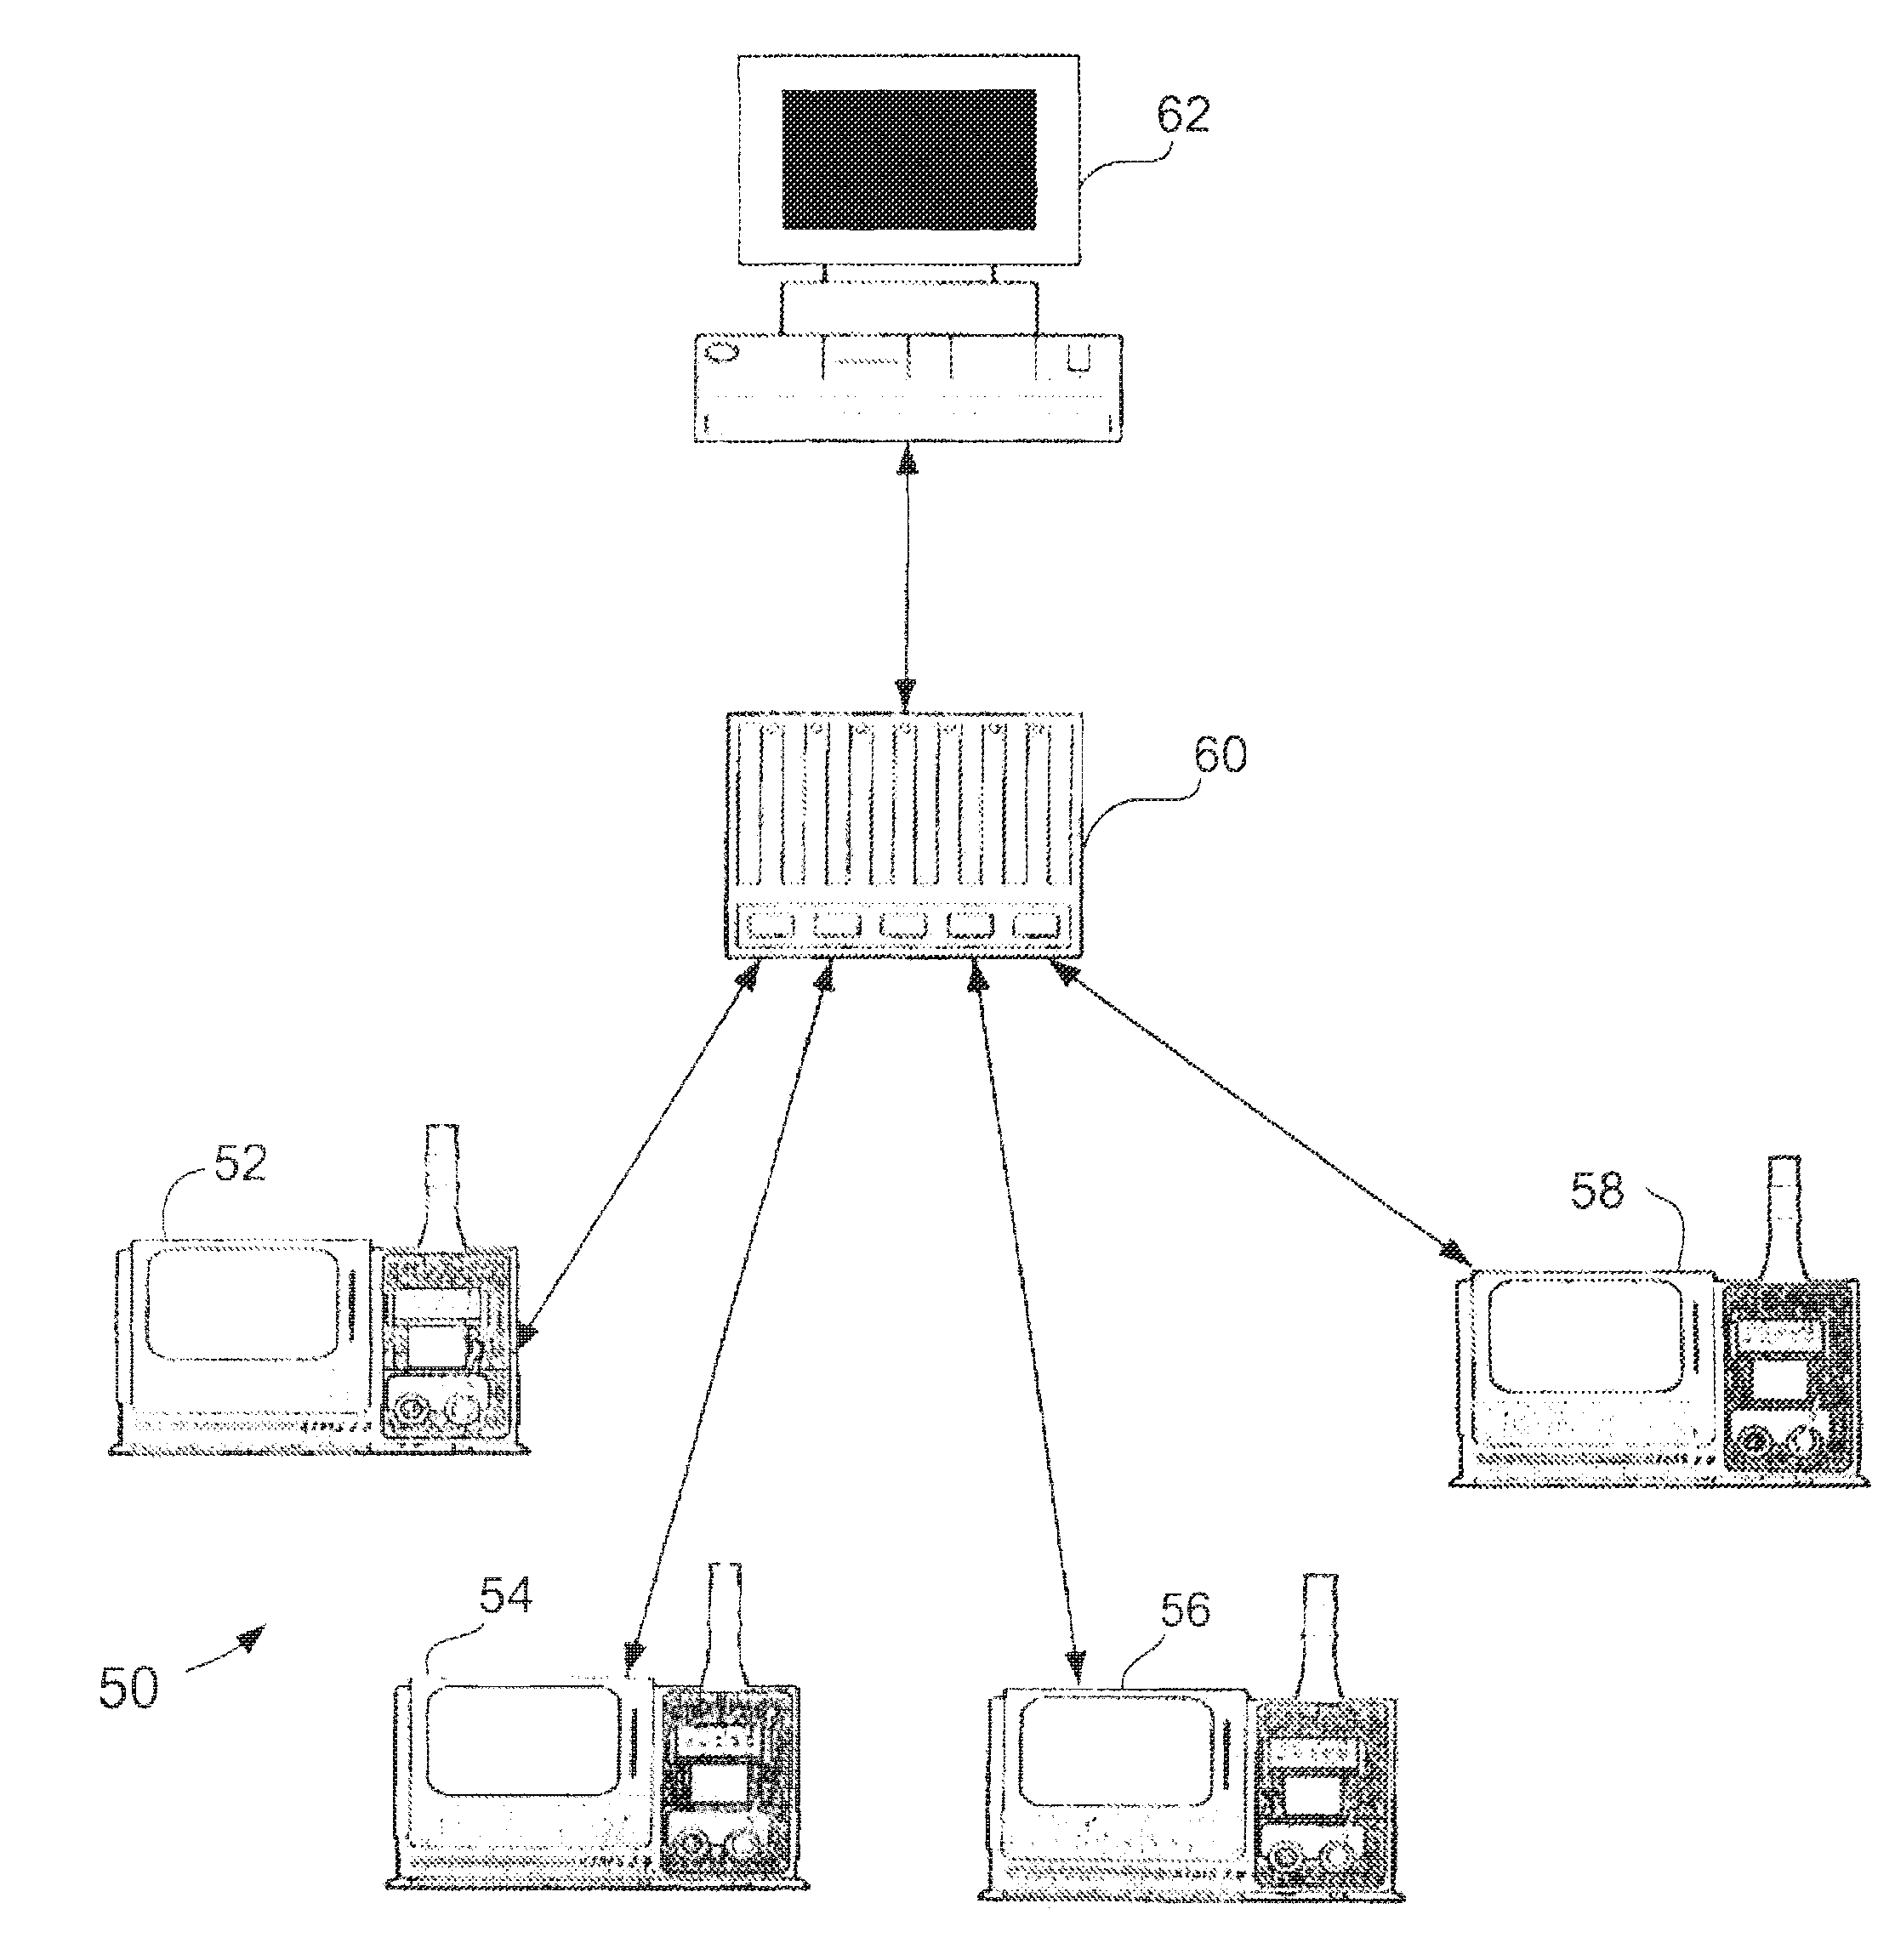 Systems and methods for a real time machine simulator to explore the effects of rules used in a modular manufacturing or assembly system